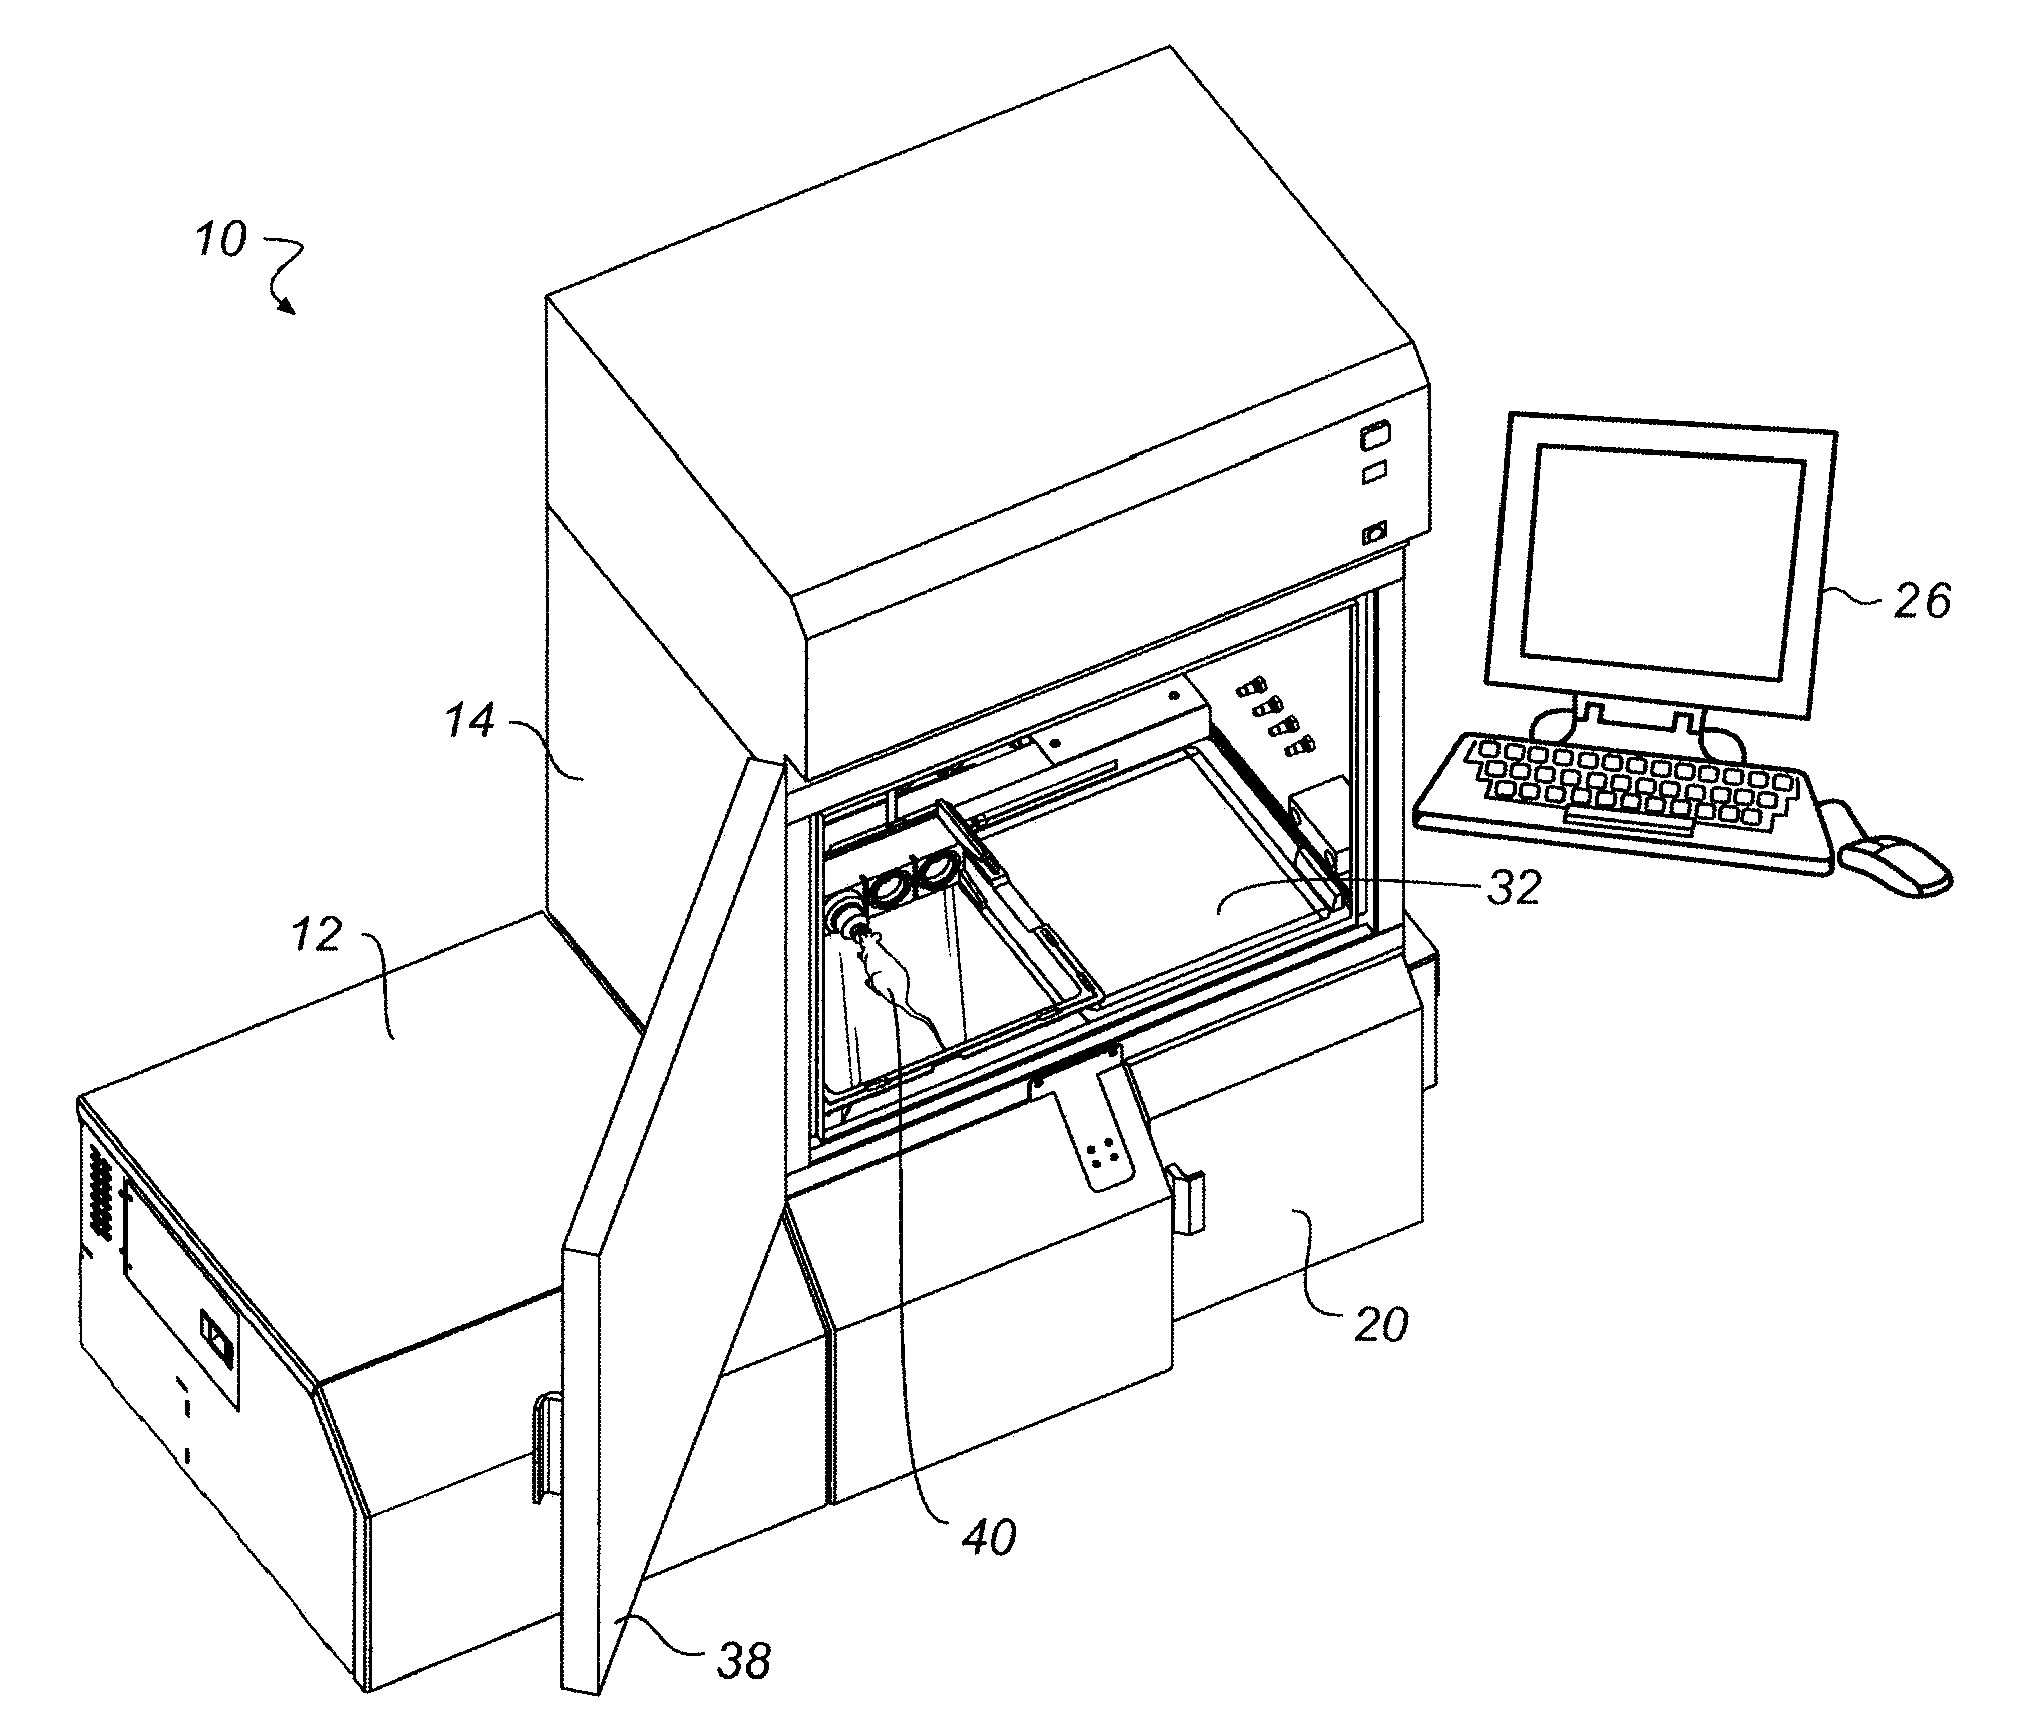 Torsional support apparatus and method for craniocaudal rotation of animals